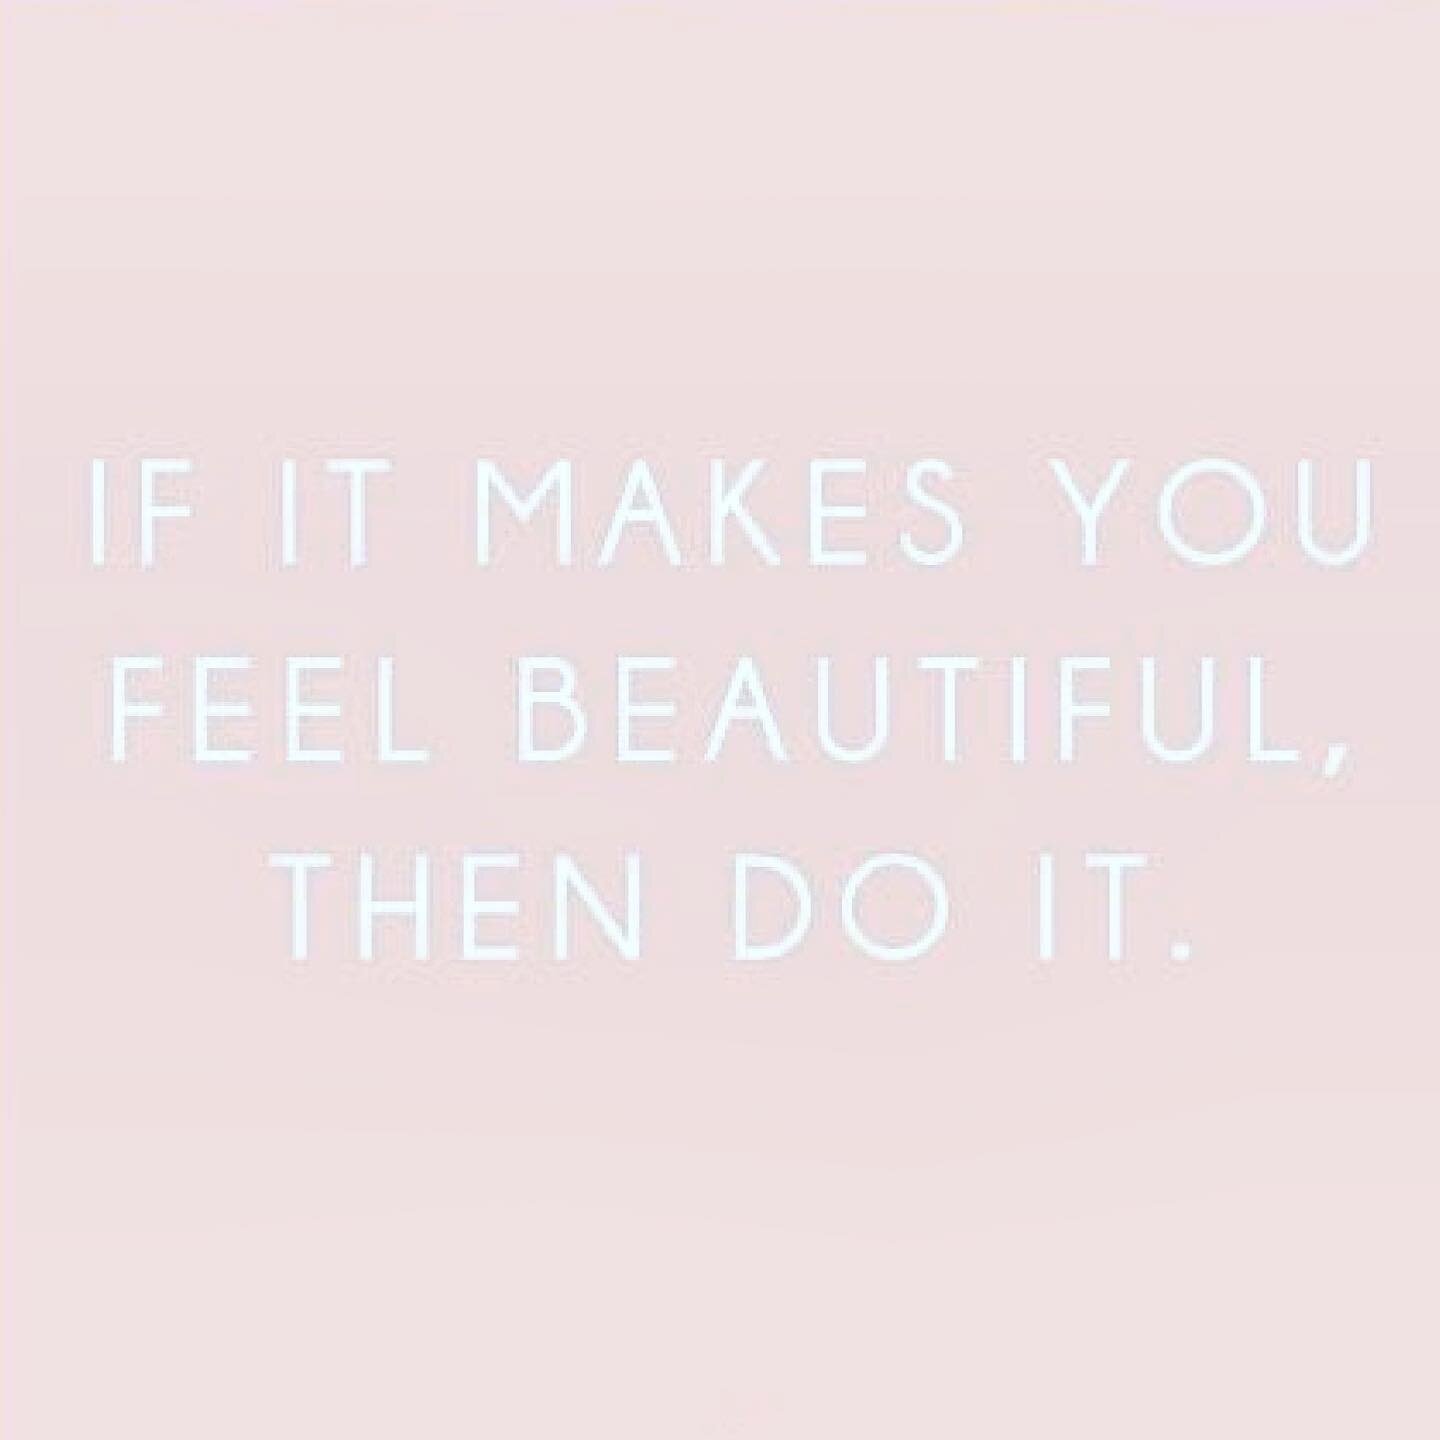 Available Gel Polish Manicures and Pedicures today with Annie. One spot open with Taylor at 10:30am for waxing. Book online this morning and let us take care of you today 🤍 #yyjnails #yyjbeauty #victoriabc #vancouverisland